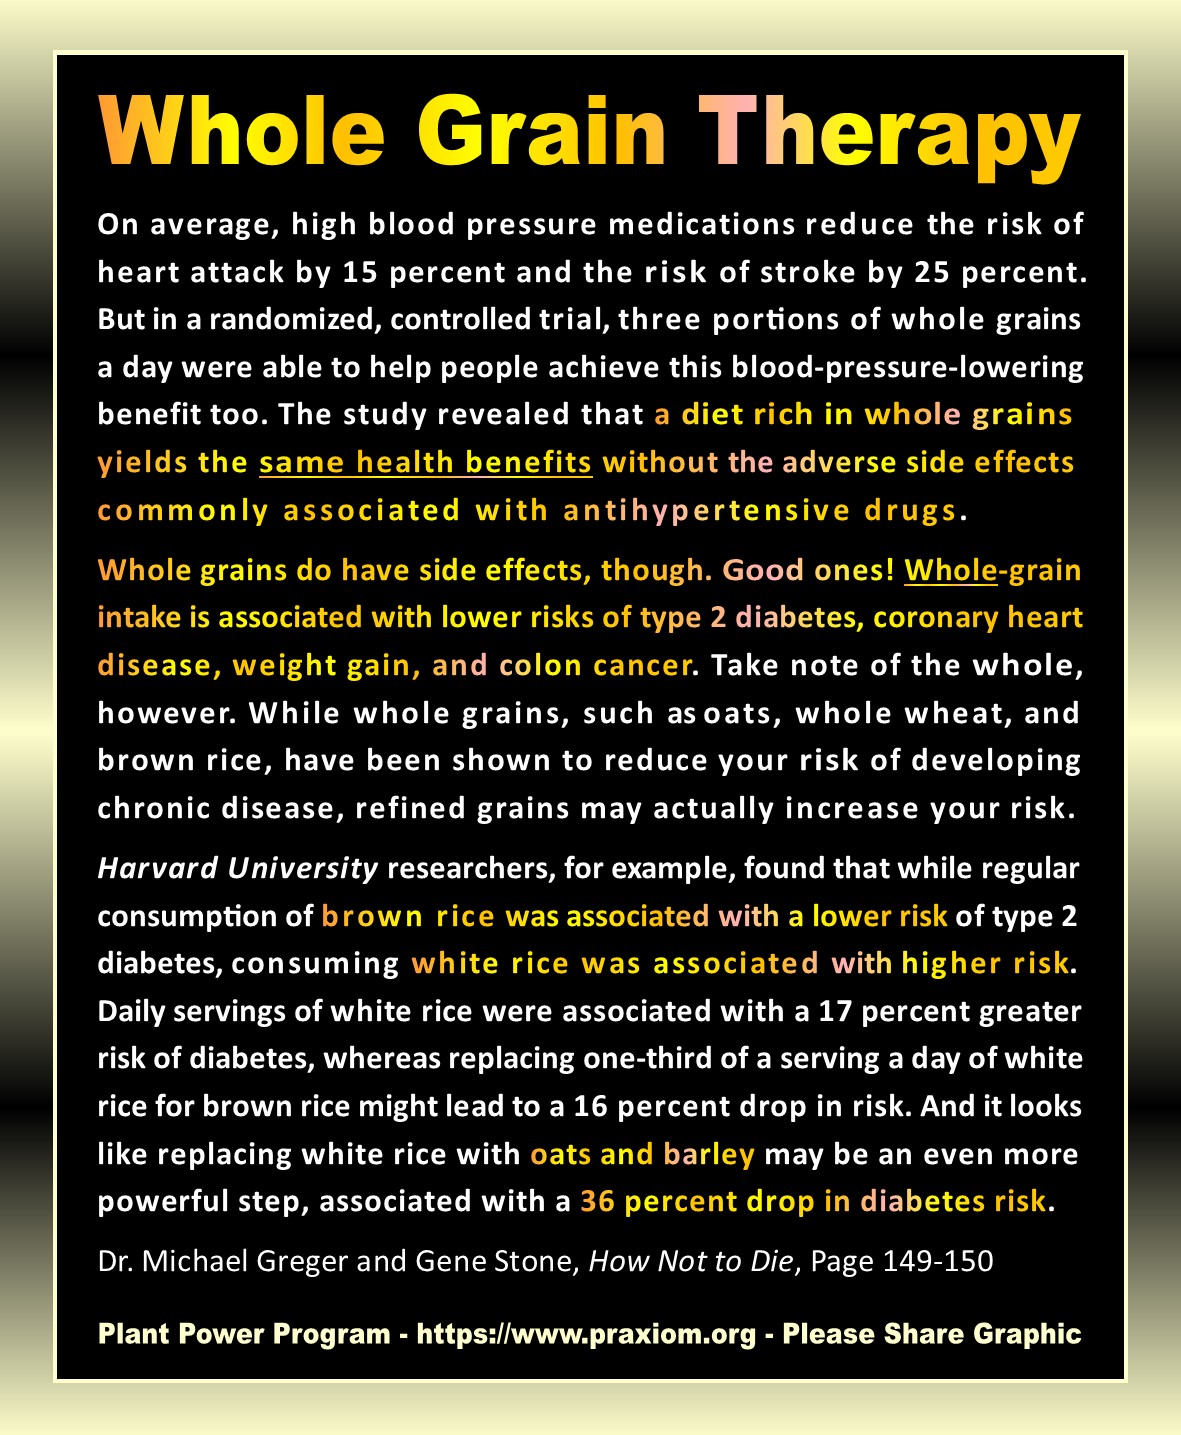 Whole Grain Therapy - Dr Michael Greger